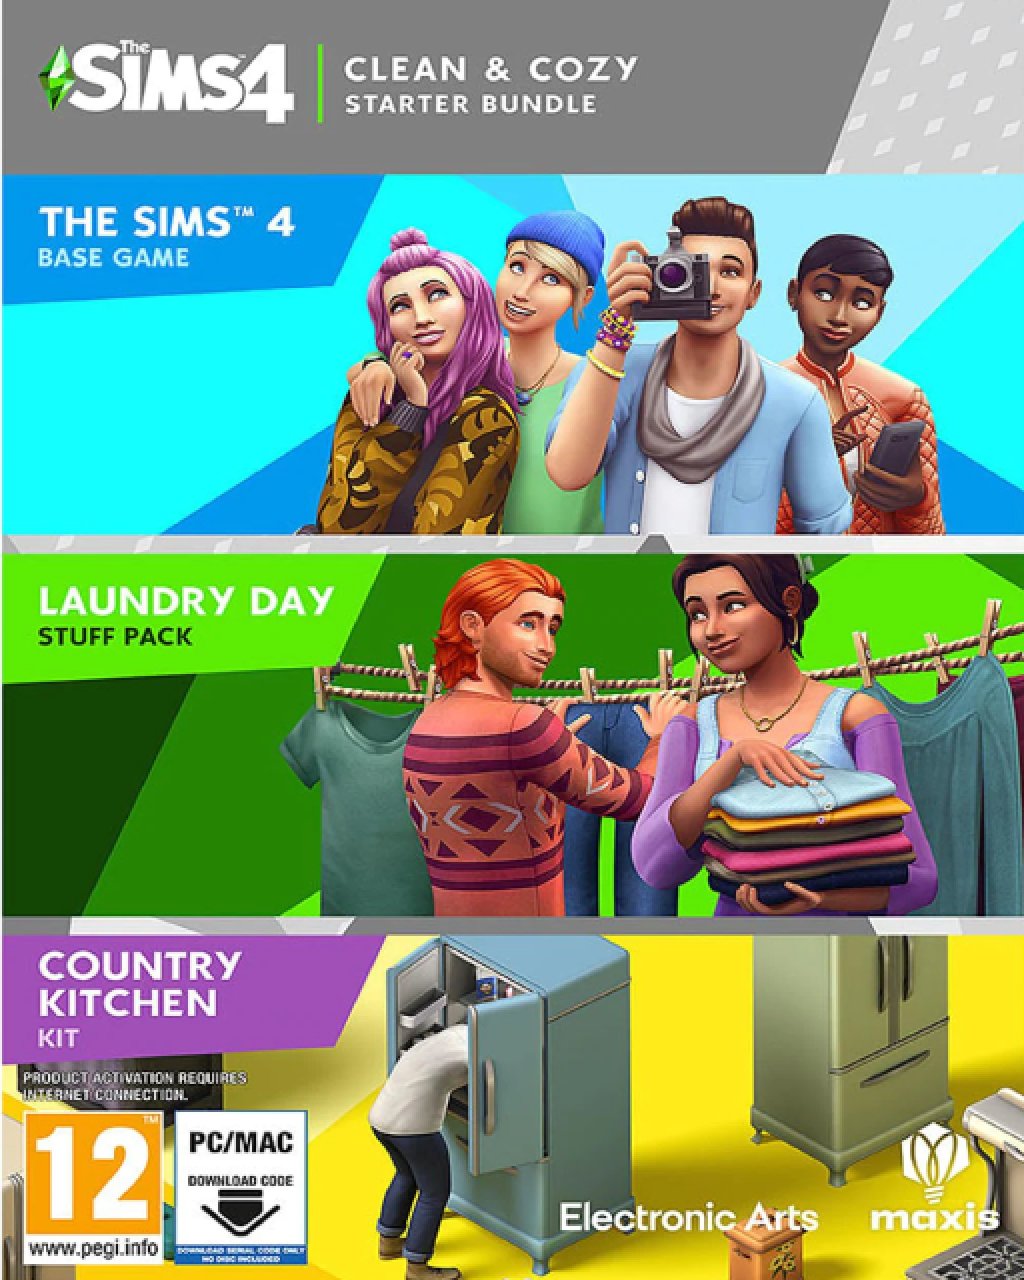 The Sims 4 Clean & Cozy Starter Bundle